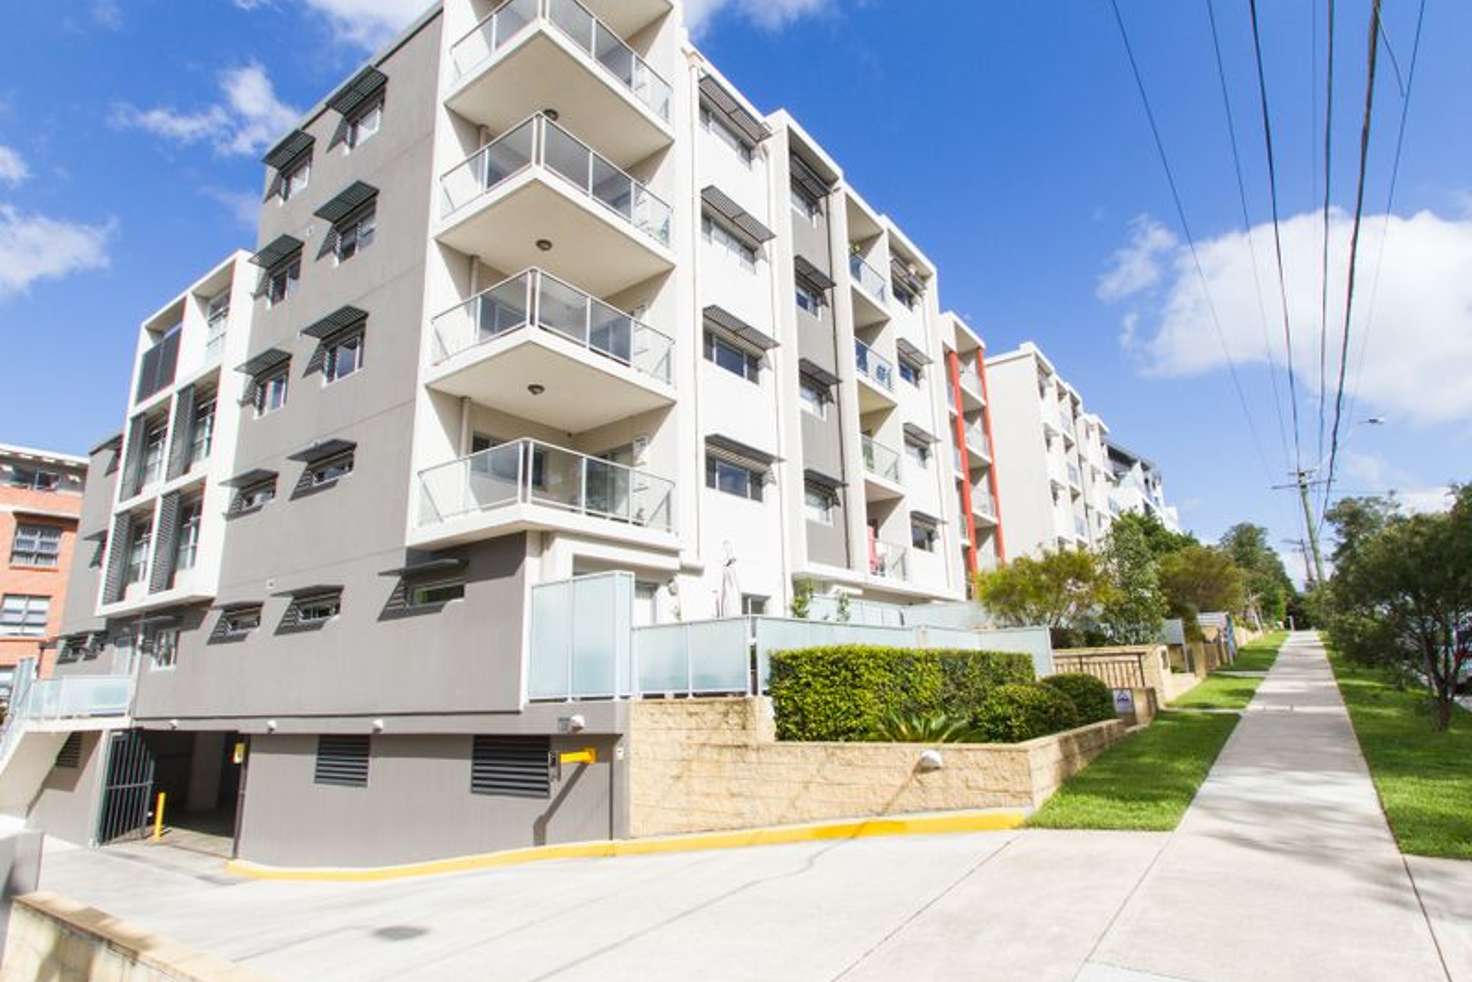 Main view of Homely apartment listing, 31/626 Mowbray Road, Lane Cove North NSW 2066